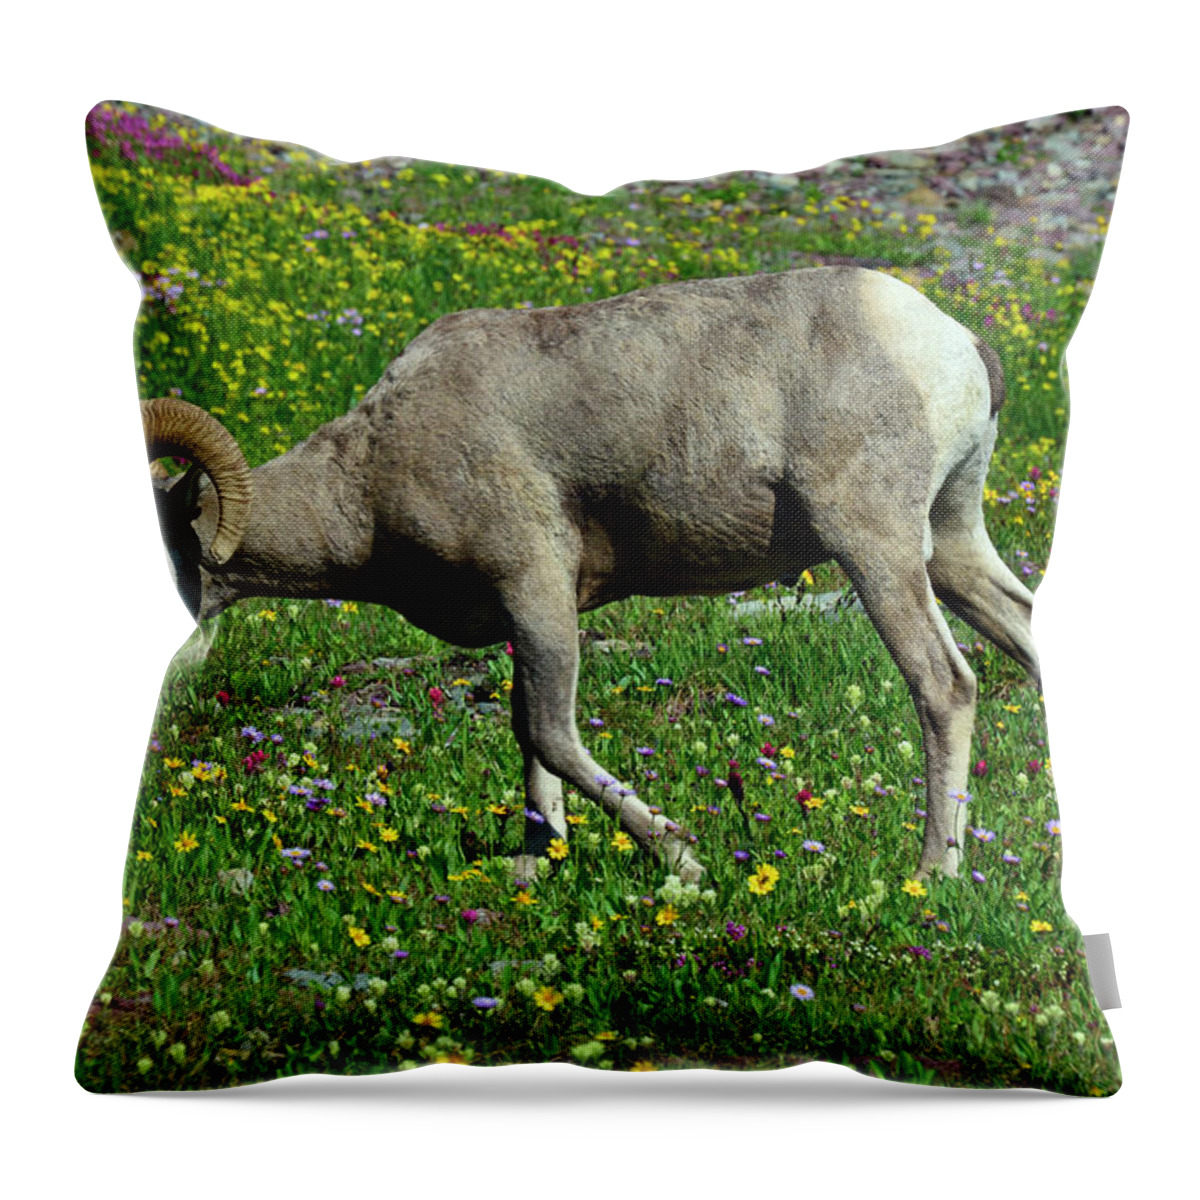 Glacier Throw Pillow featuring the photograph Big Horn Ram Eating Flowers in Glacier National Park by Bruce Gourley